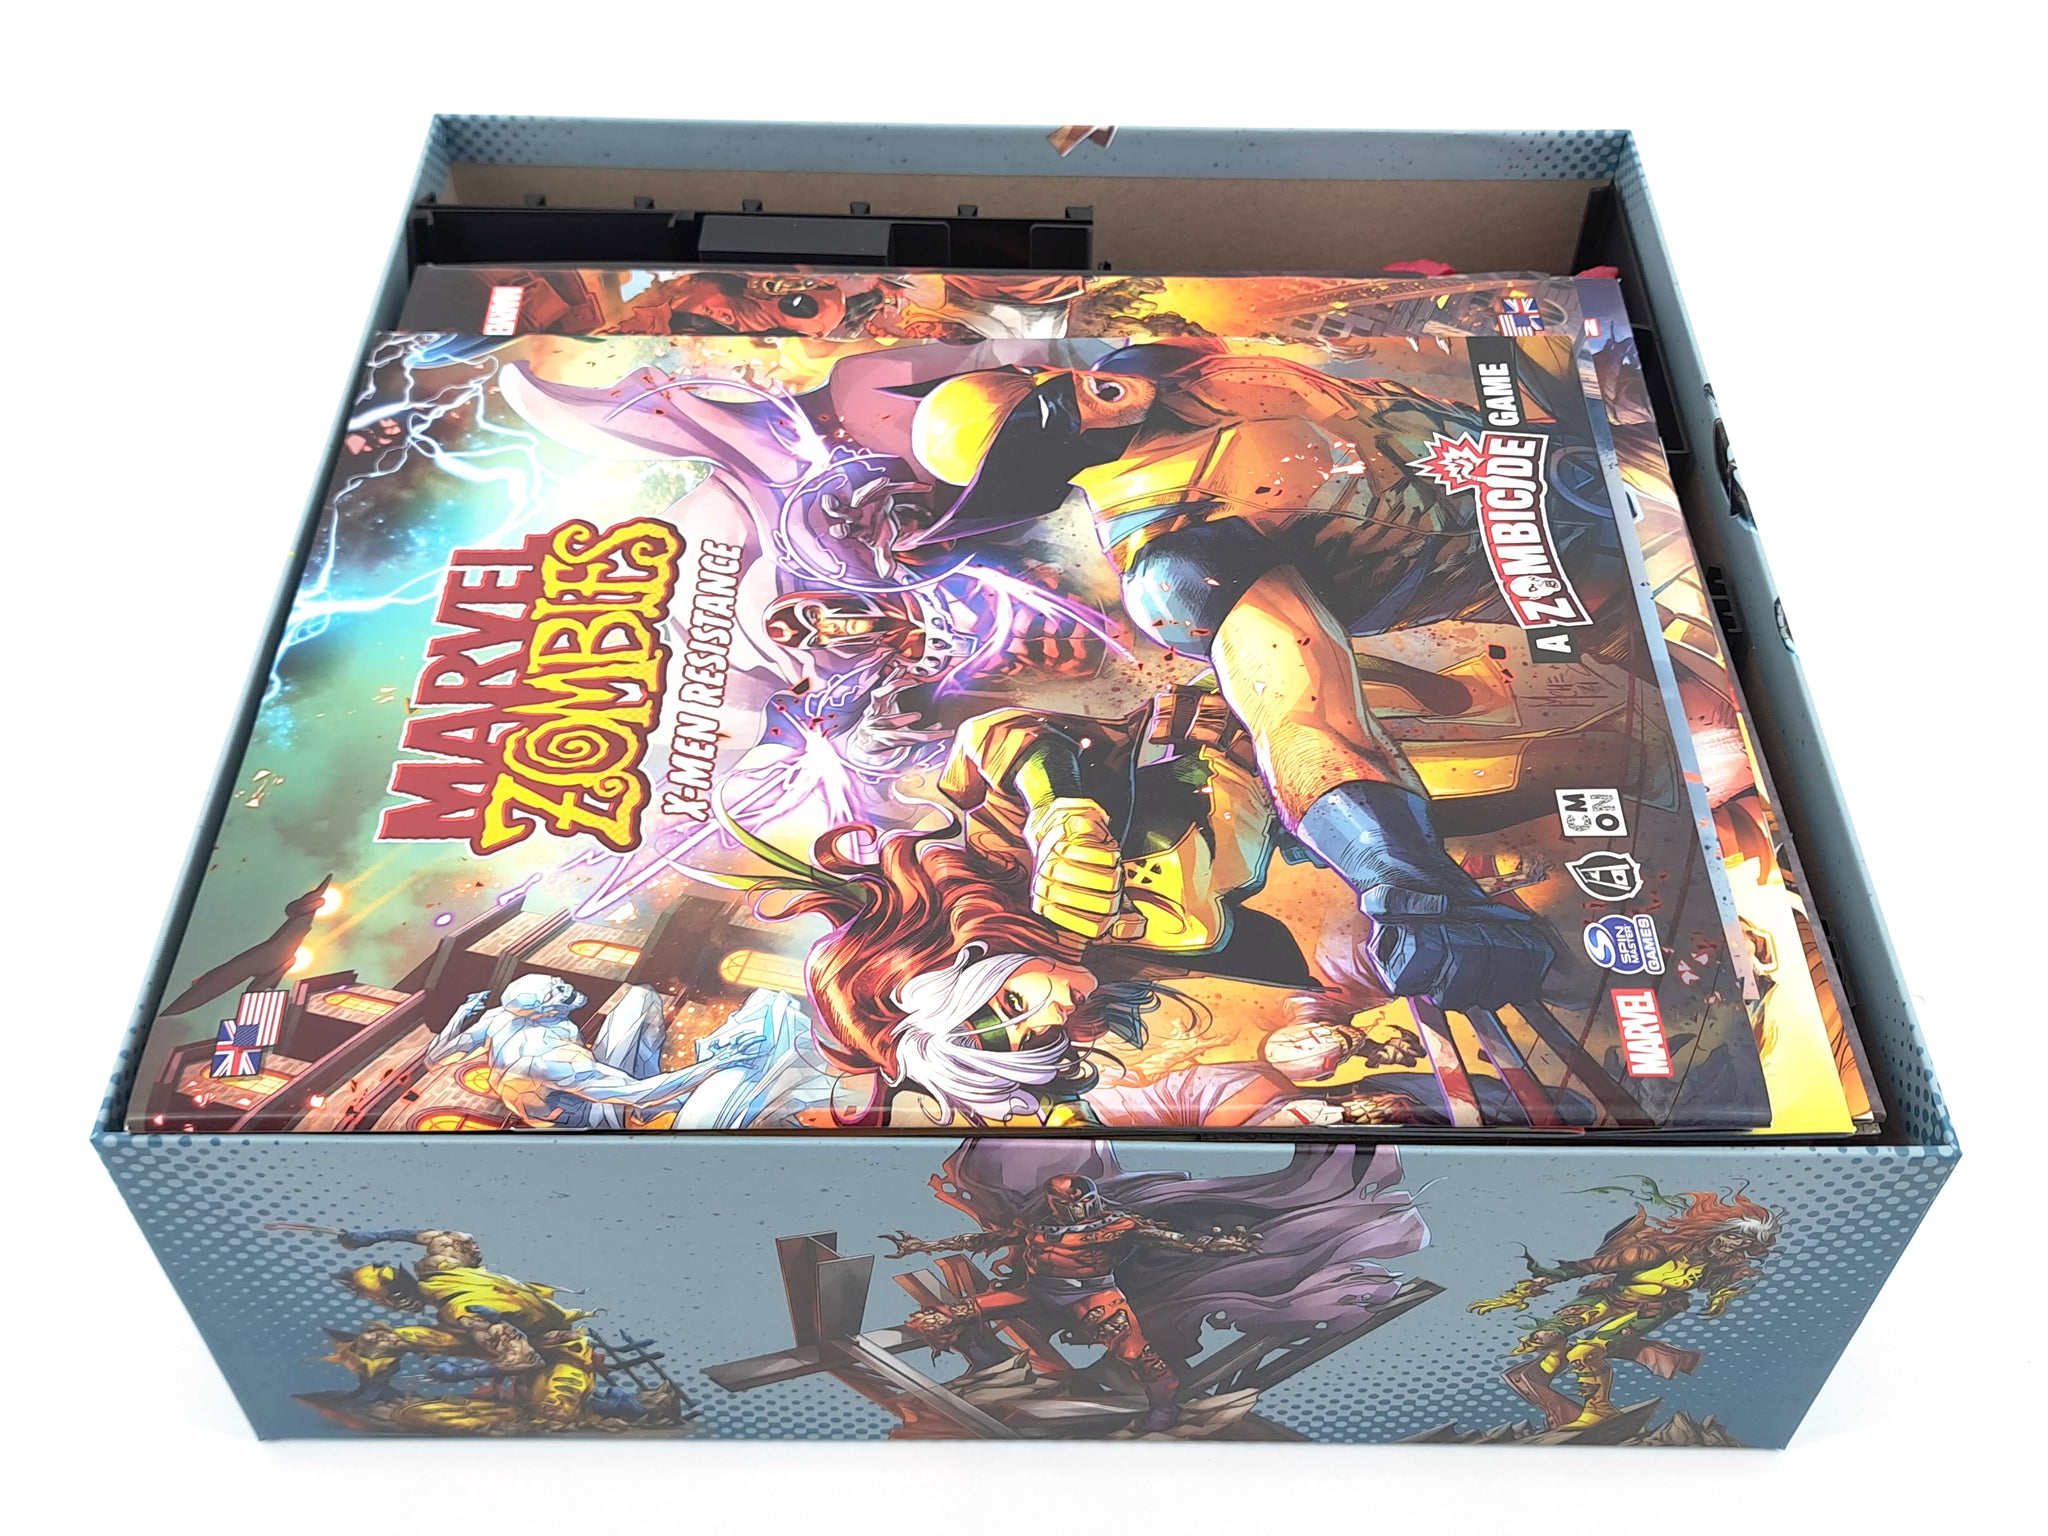 Marvel Zombies: A Zombicide Game, Board Game